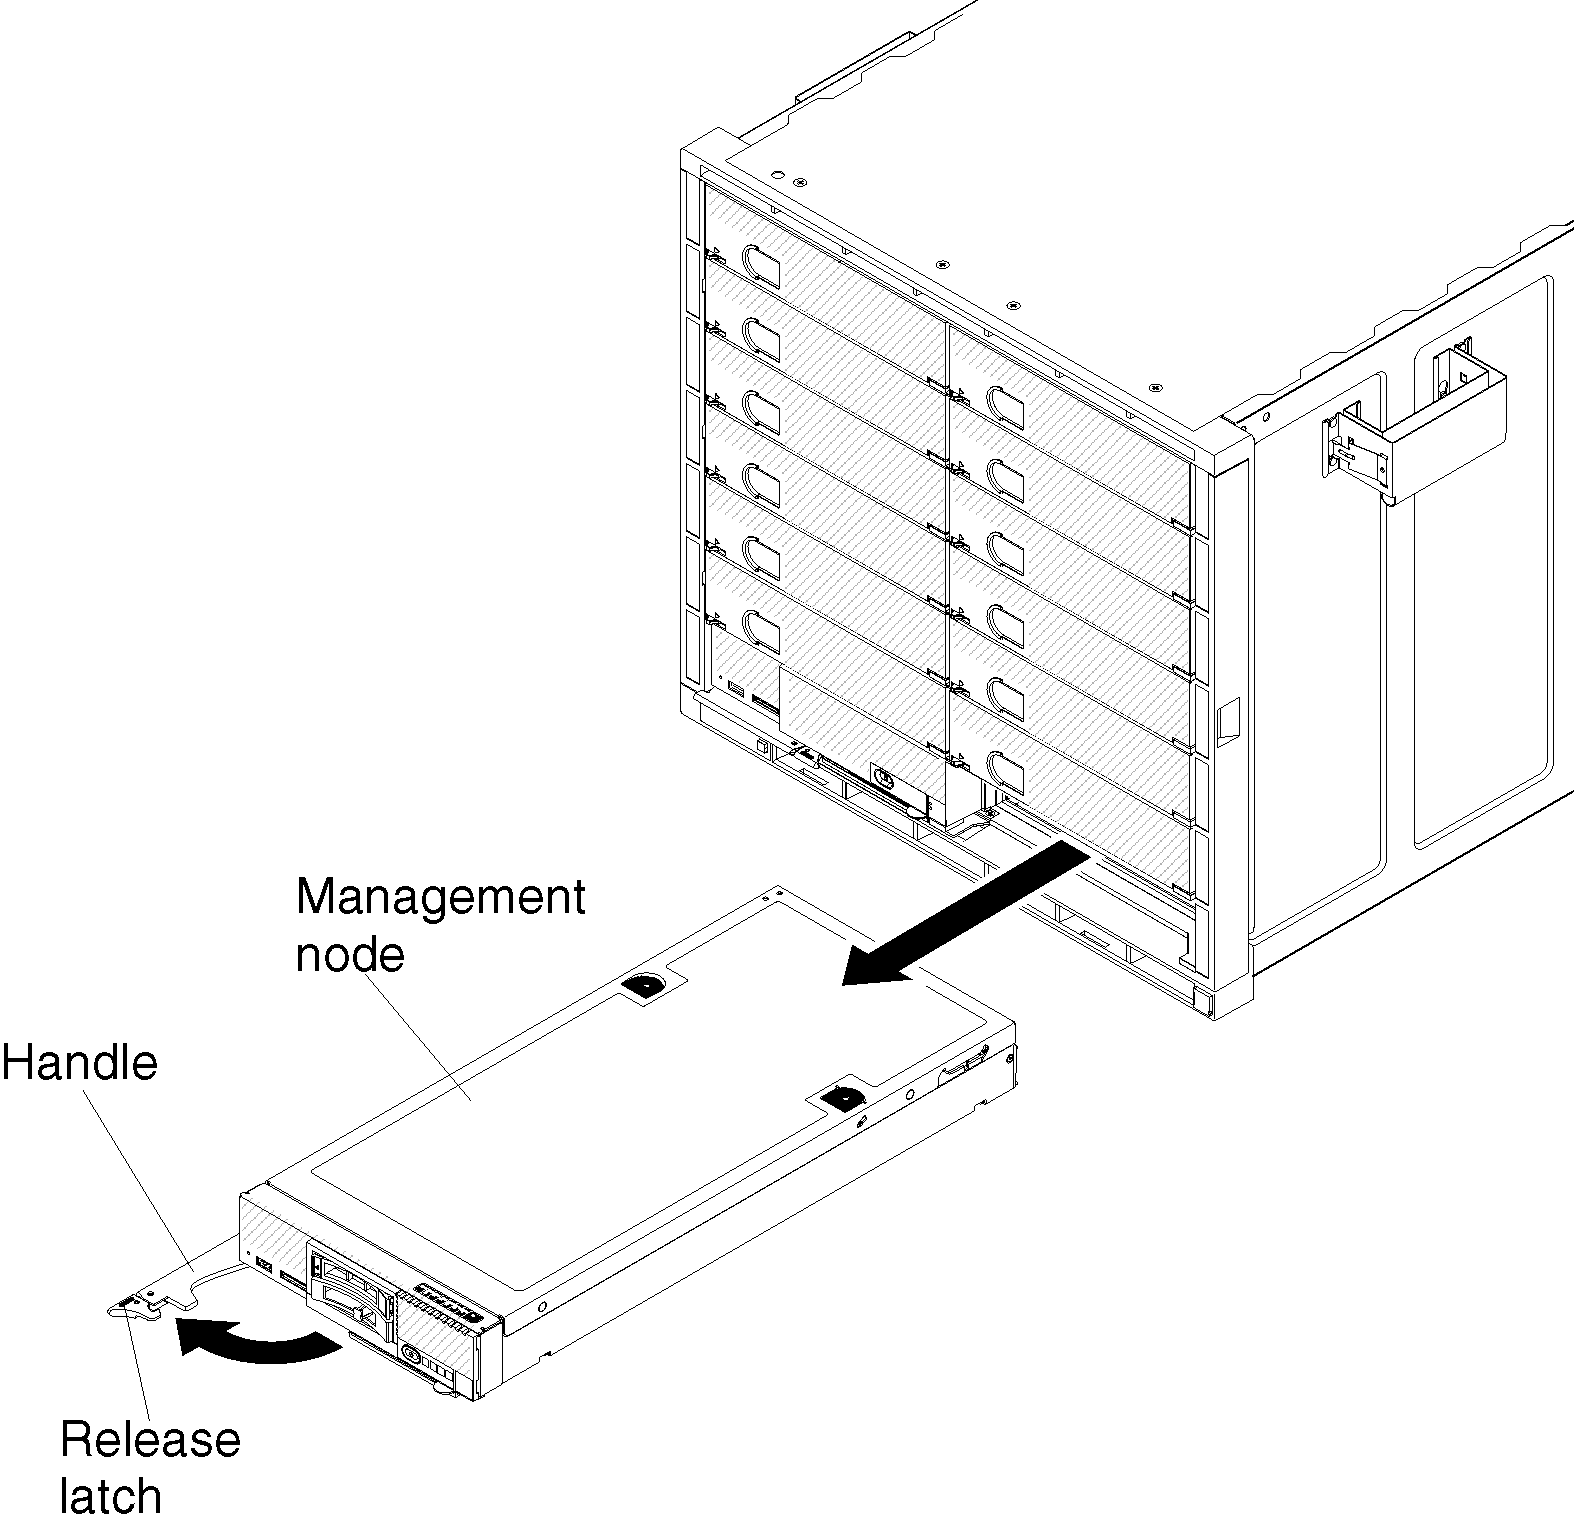 Graphic illustrating the removal of a Flex System Manager from the chassis